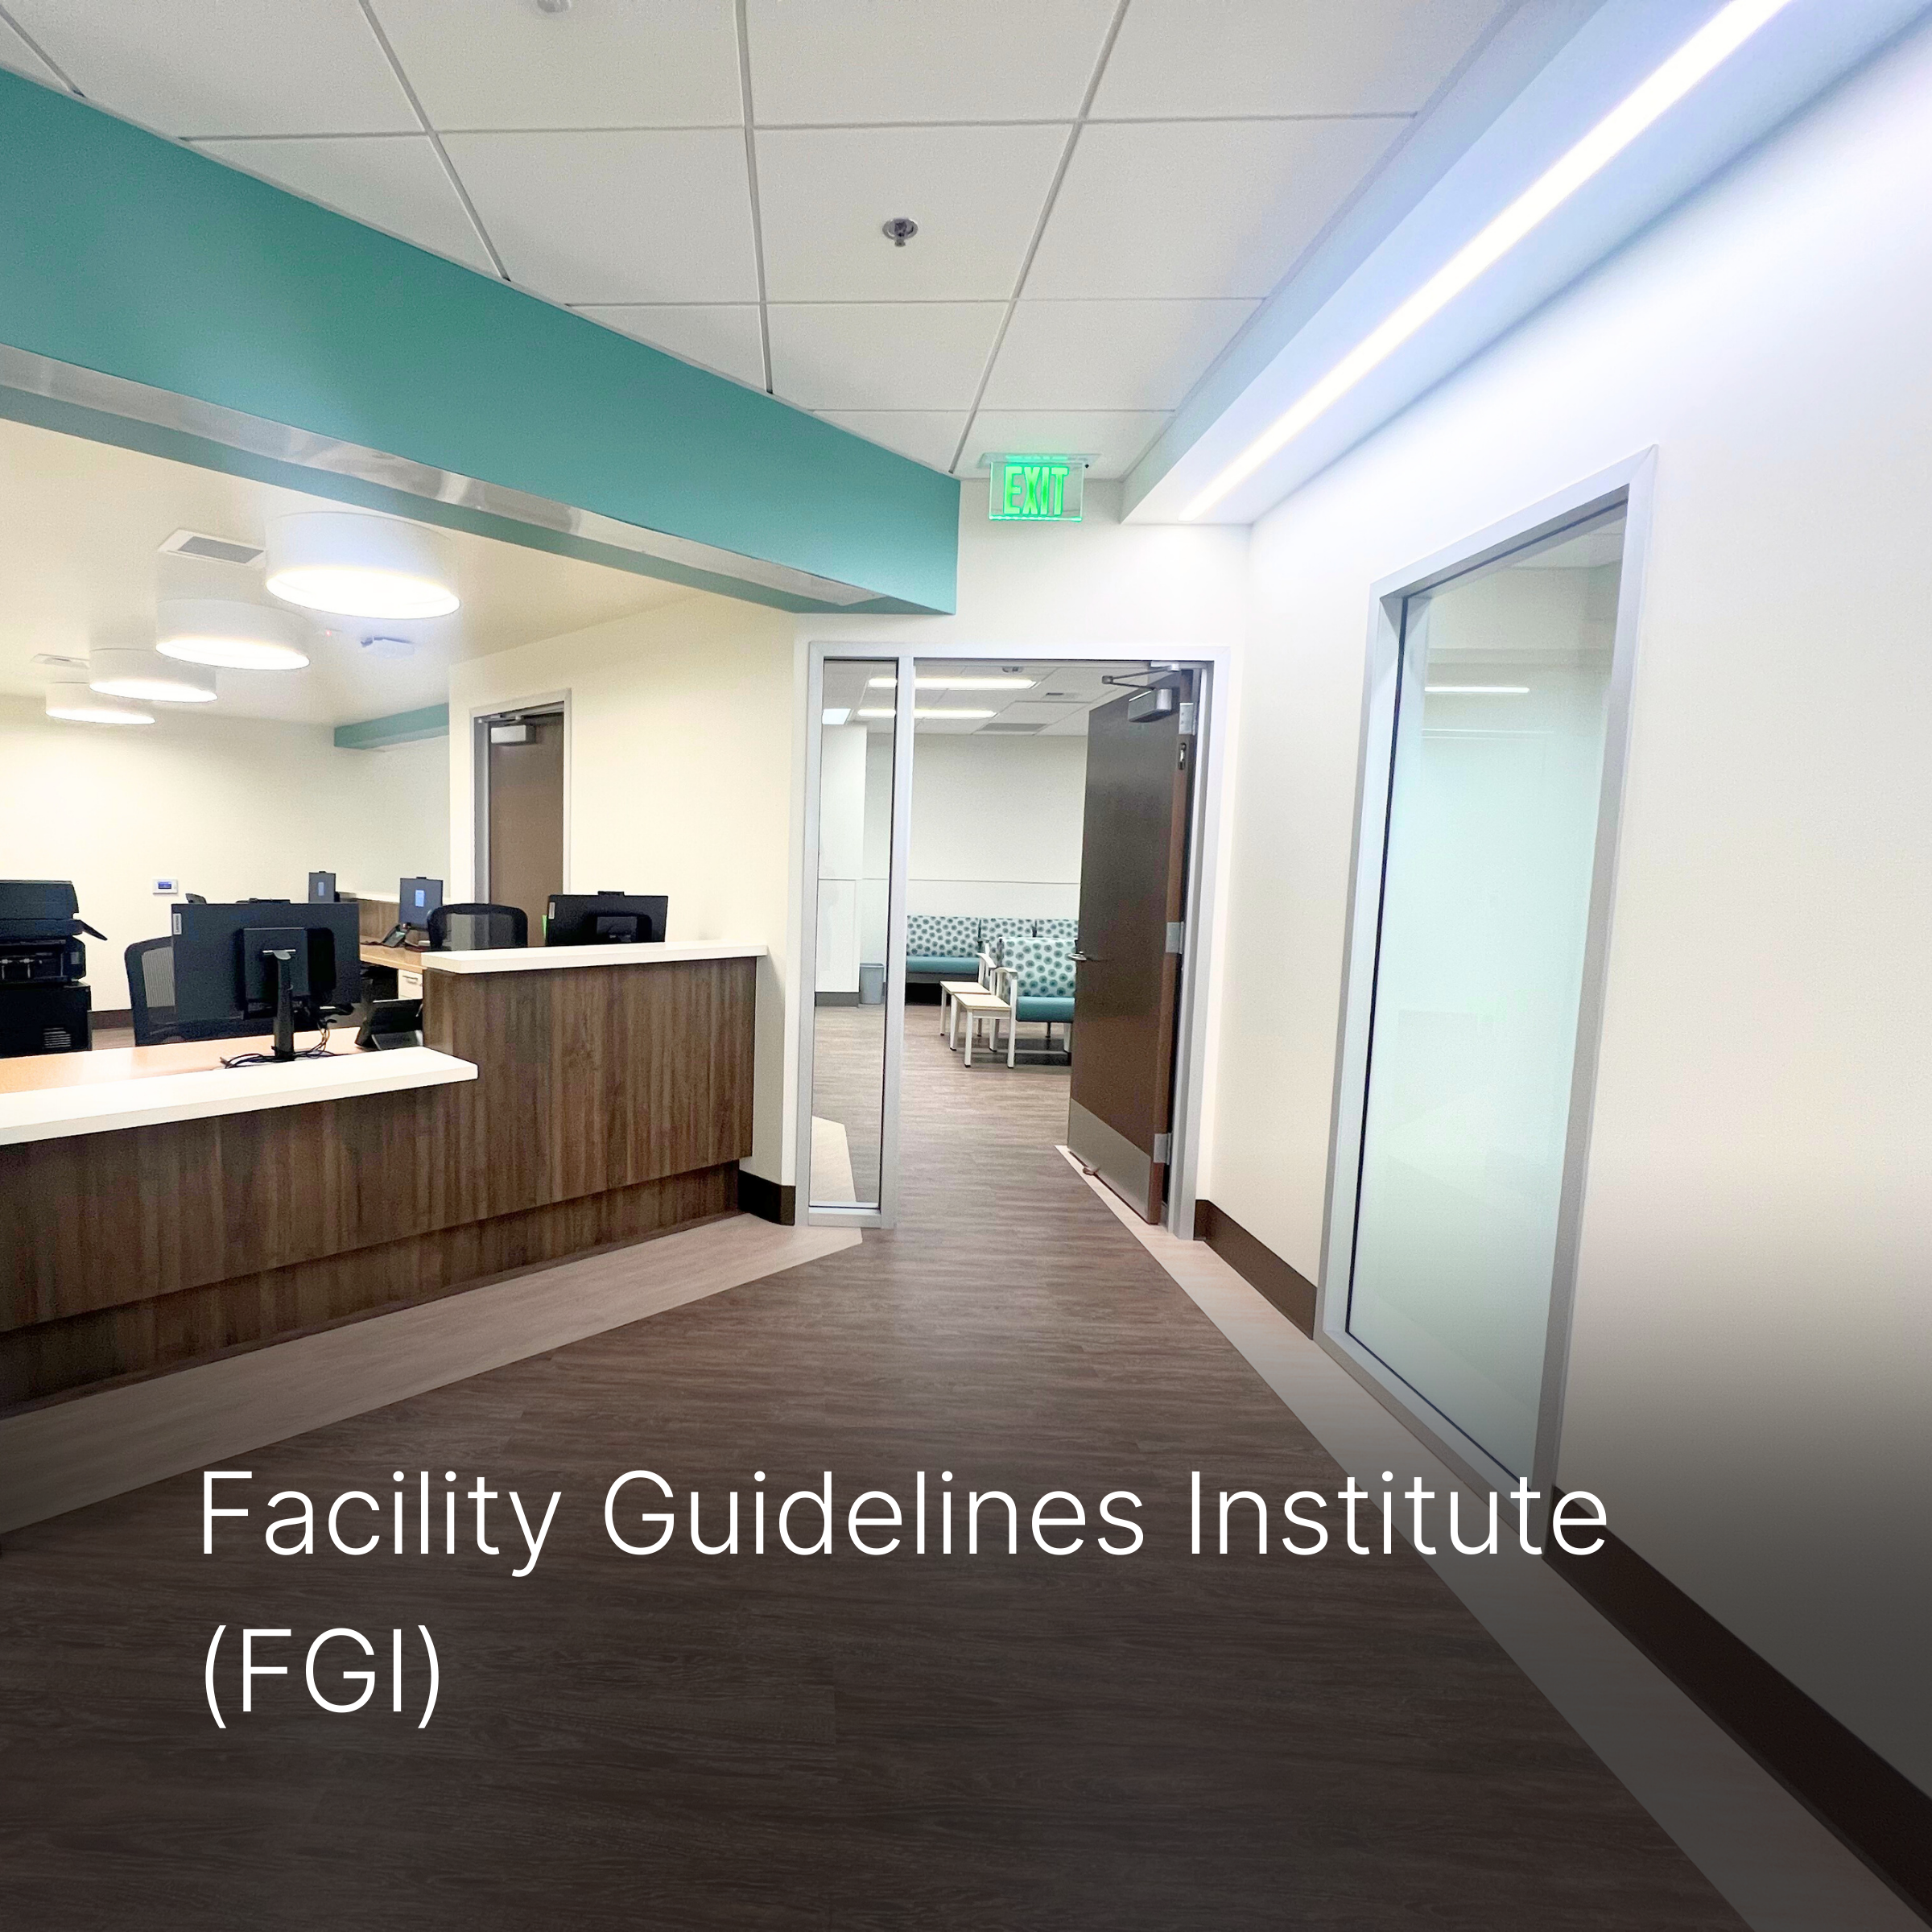 Healthcare facility hallway with caption of Facility Guidelines Institute (FGI).